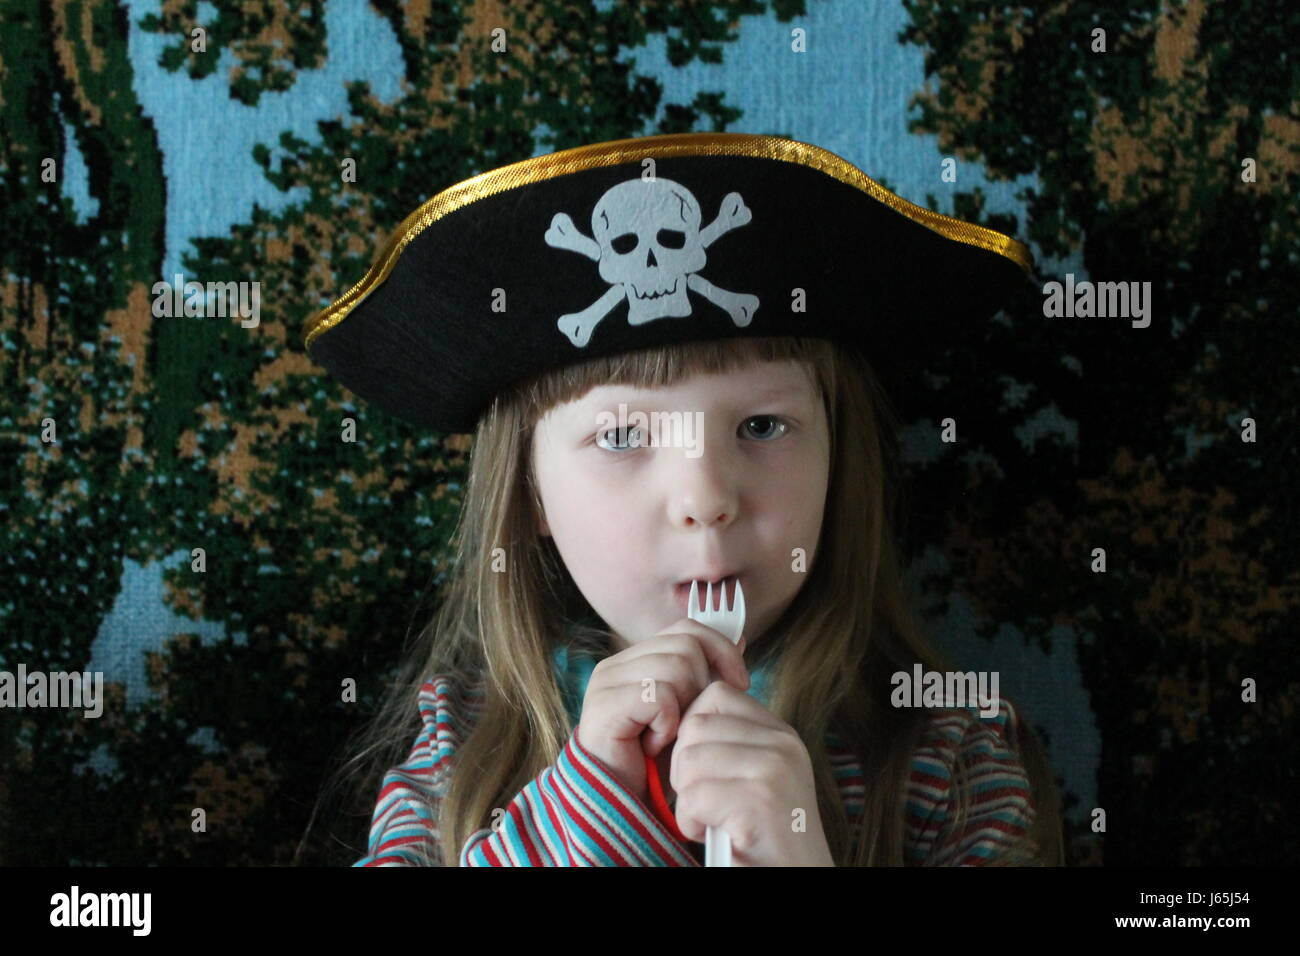 beautiful blonde girl with smiling face in hat of pirate with fork in mouth preapare to eat someone Stock Photo